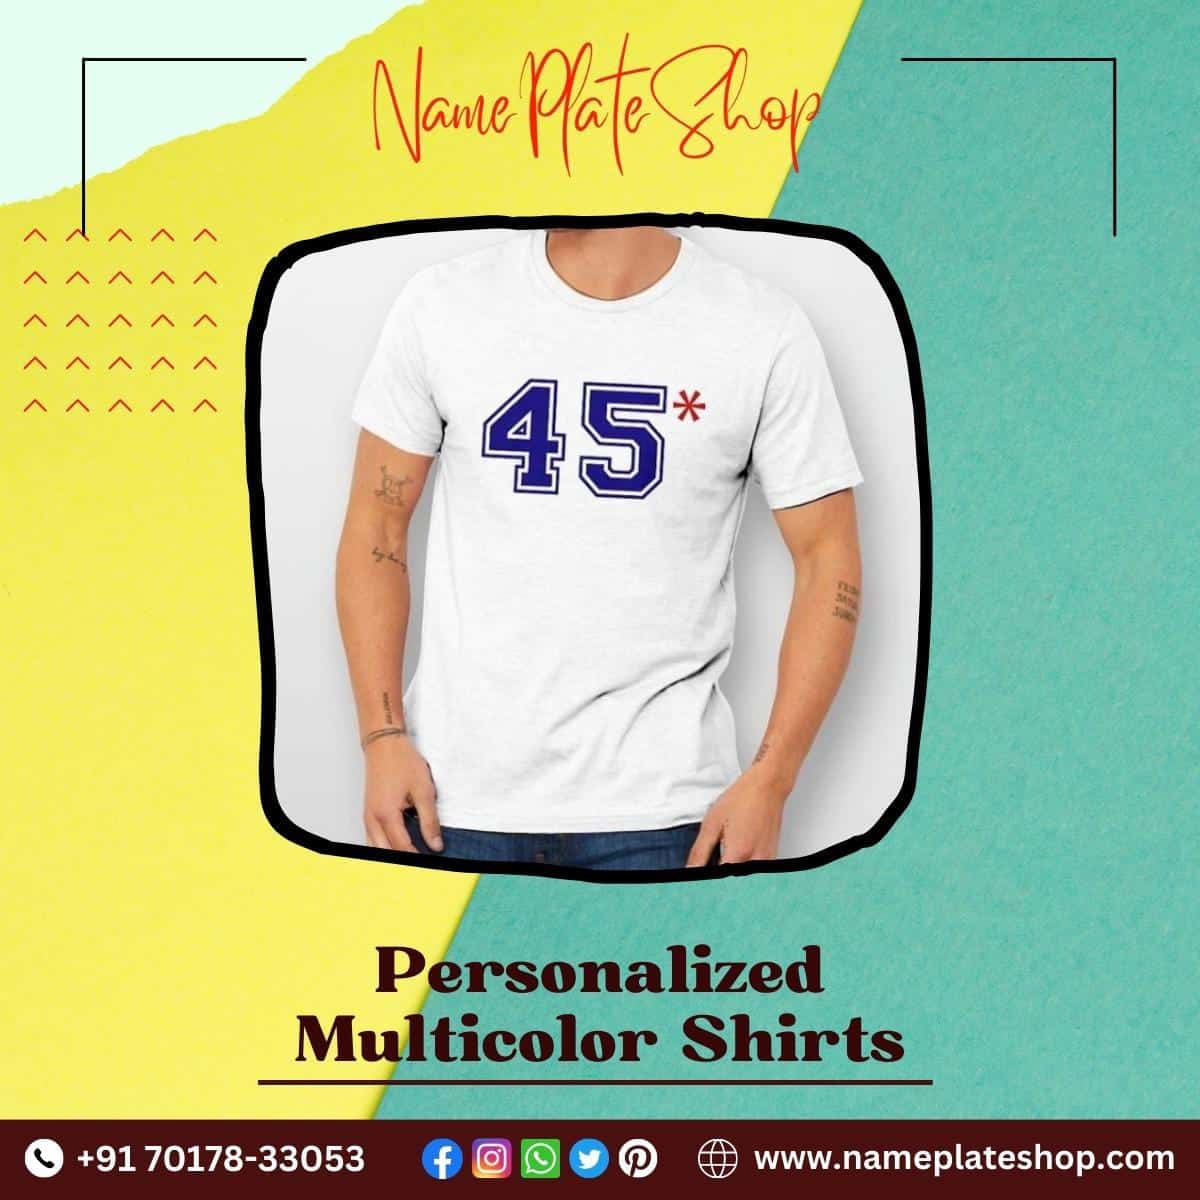 New Personalized Printed Shirts For Promotion And Branding 2